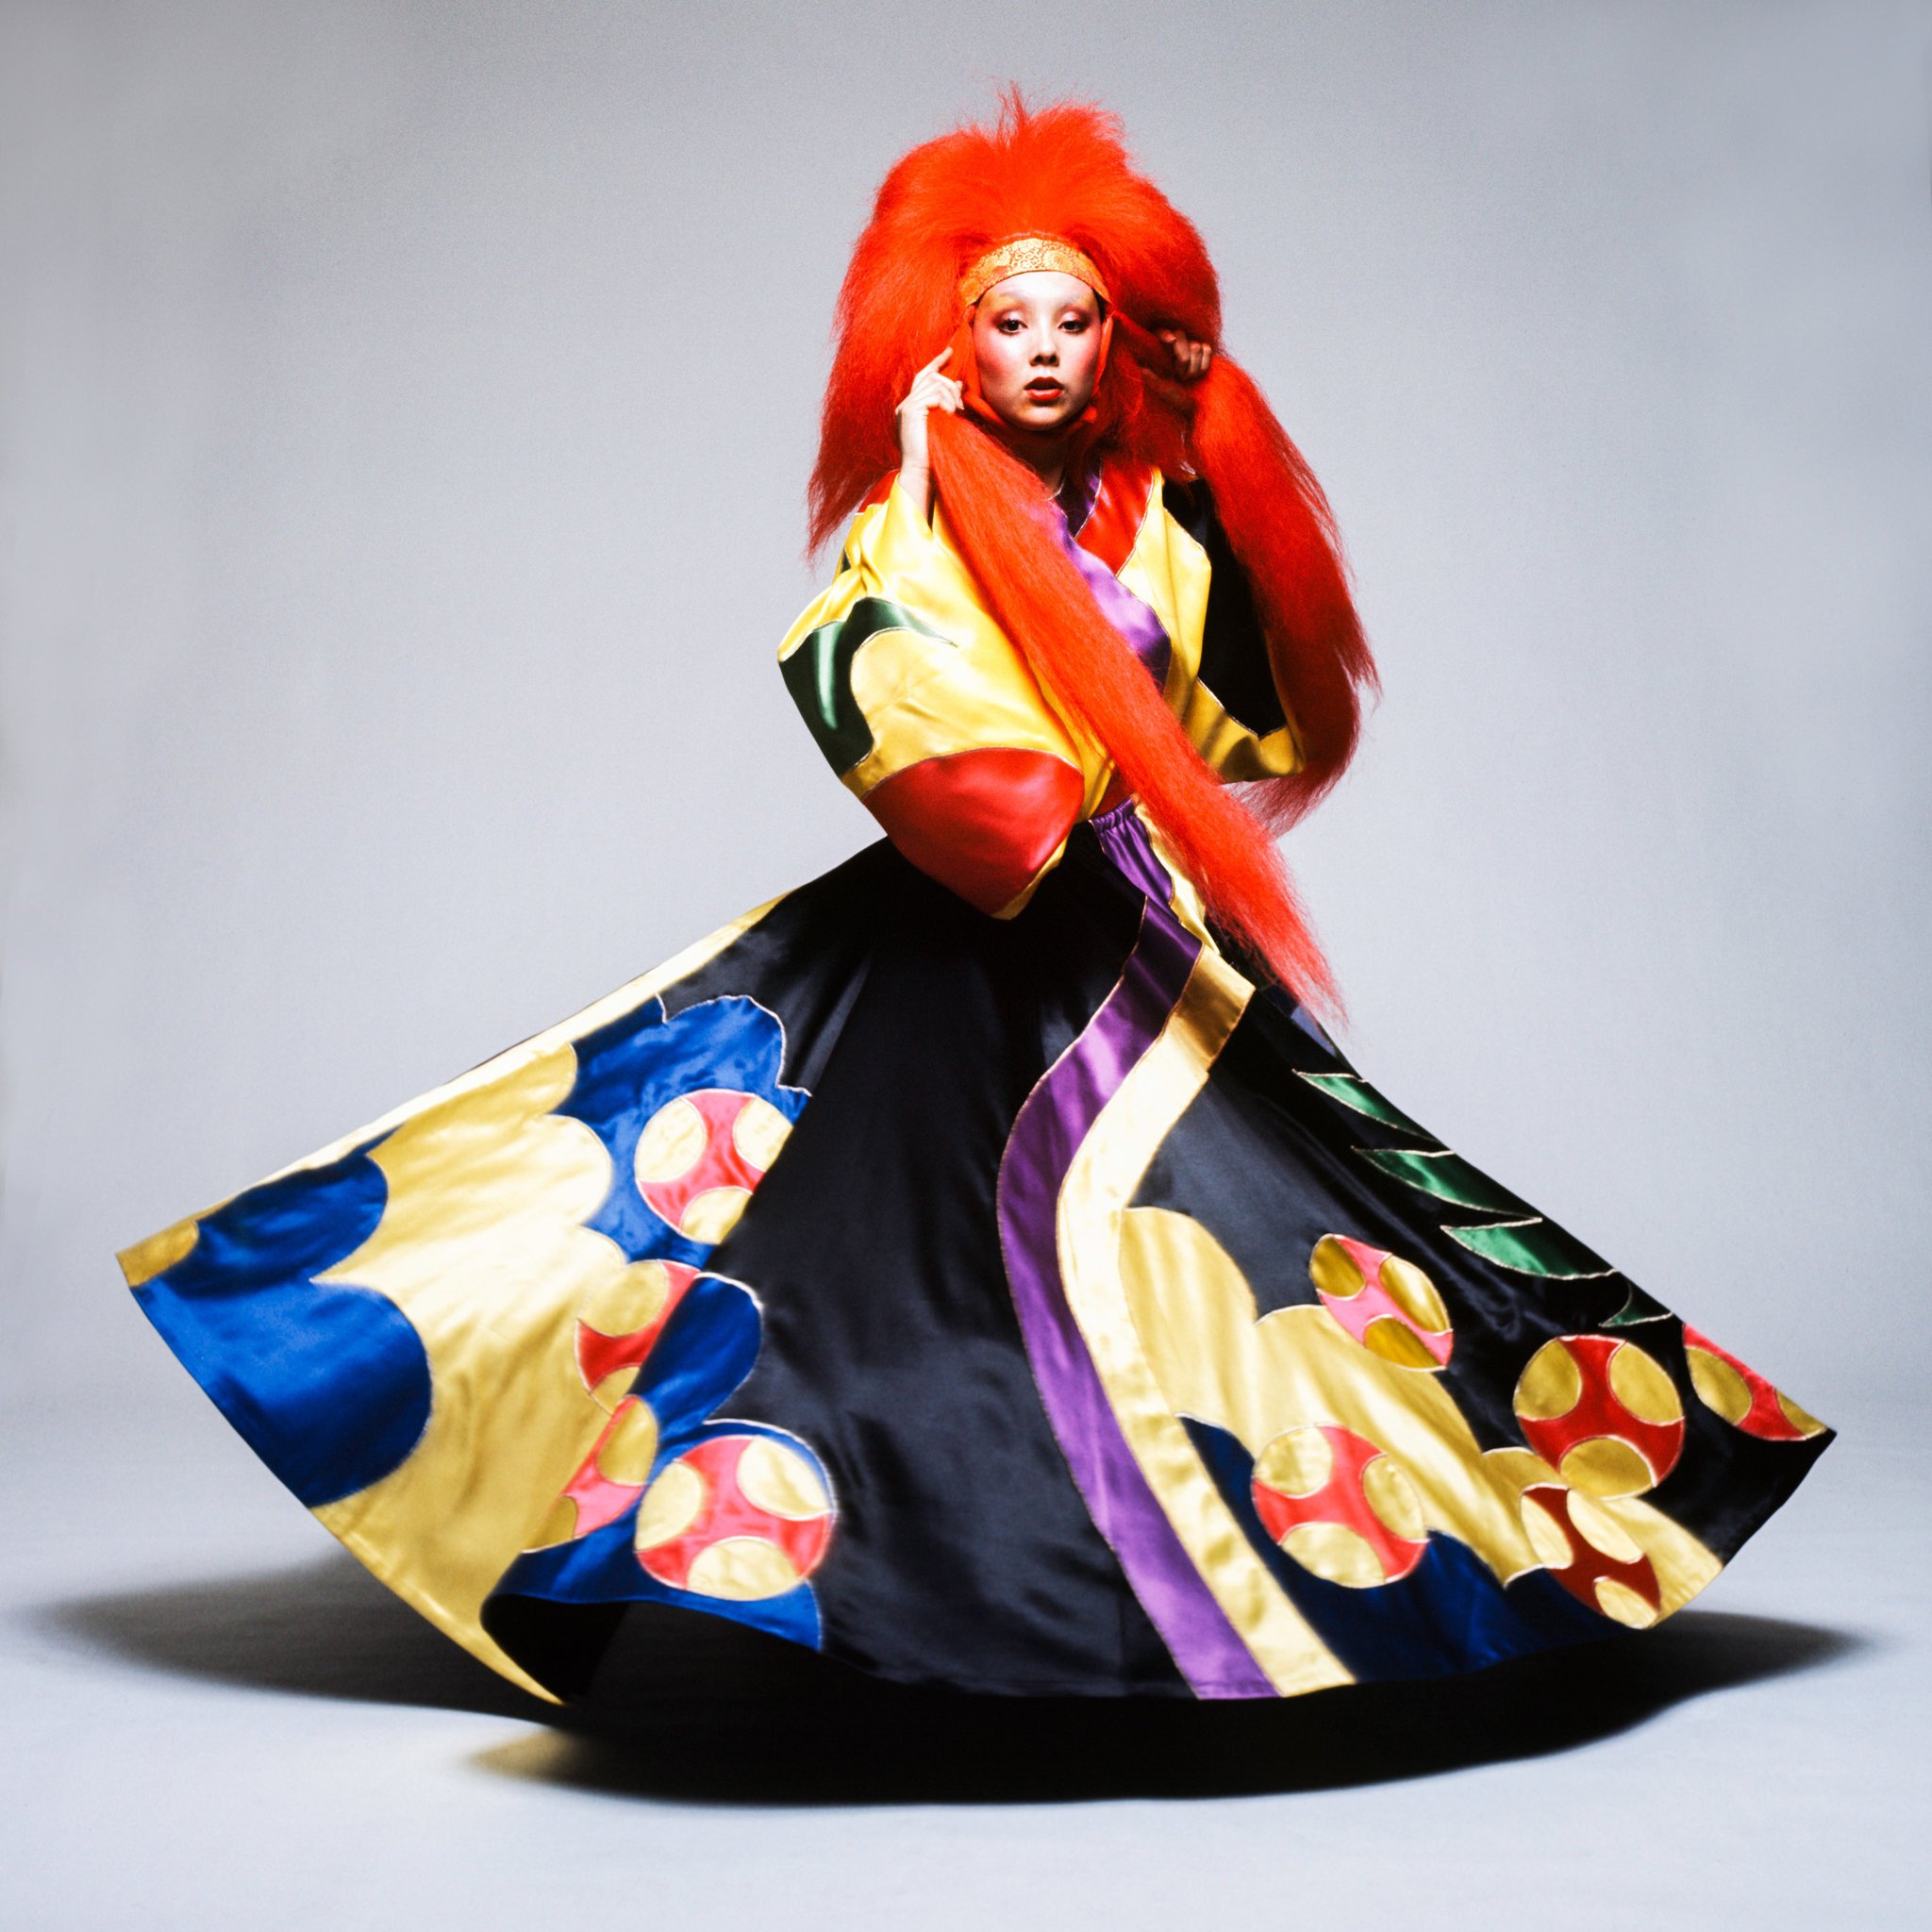 Creative Fashion Designs by Kansai Yamamoto in the Early 1970s » Design You  Trust